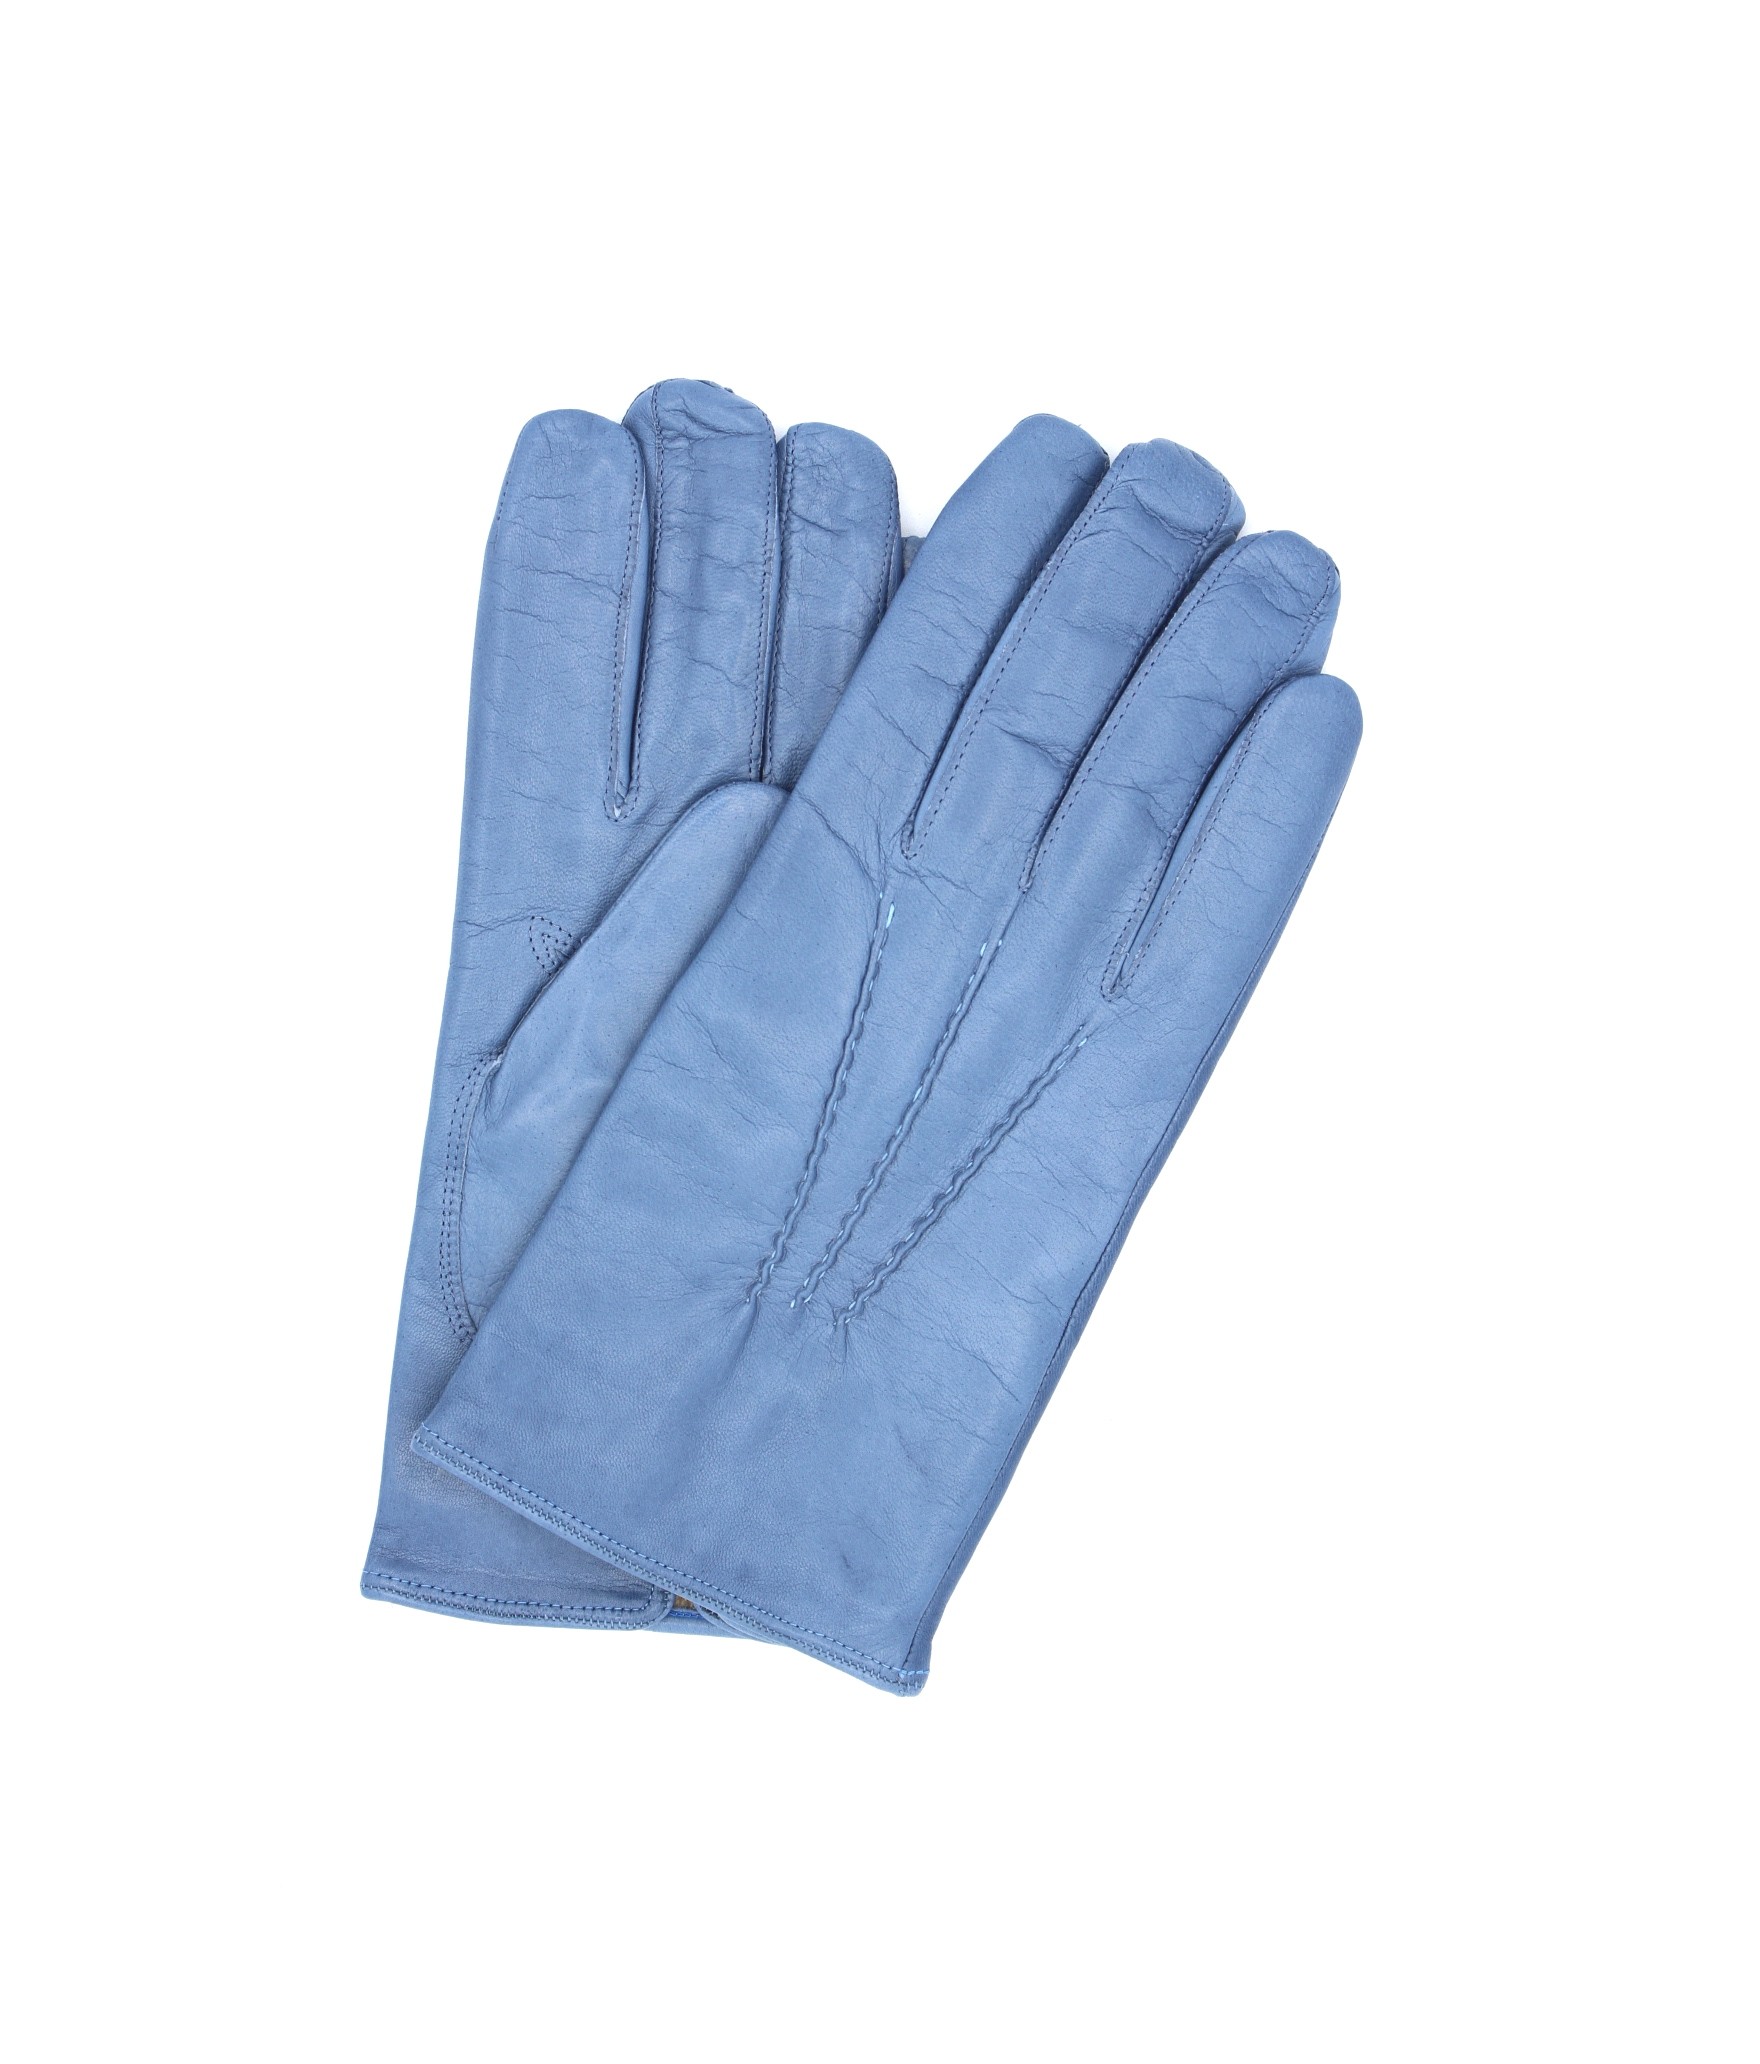 мужчина Classic Nappa leather gloves cashmere lined Denim